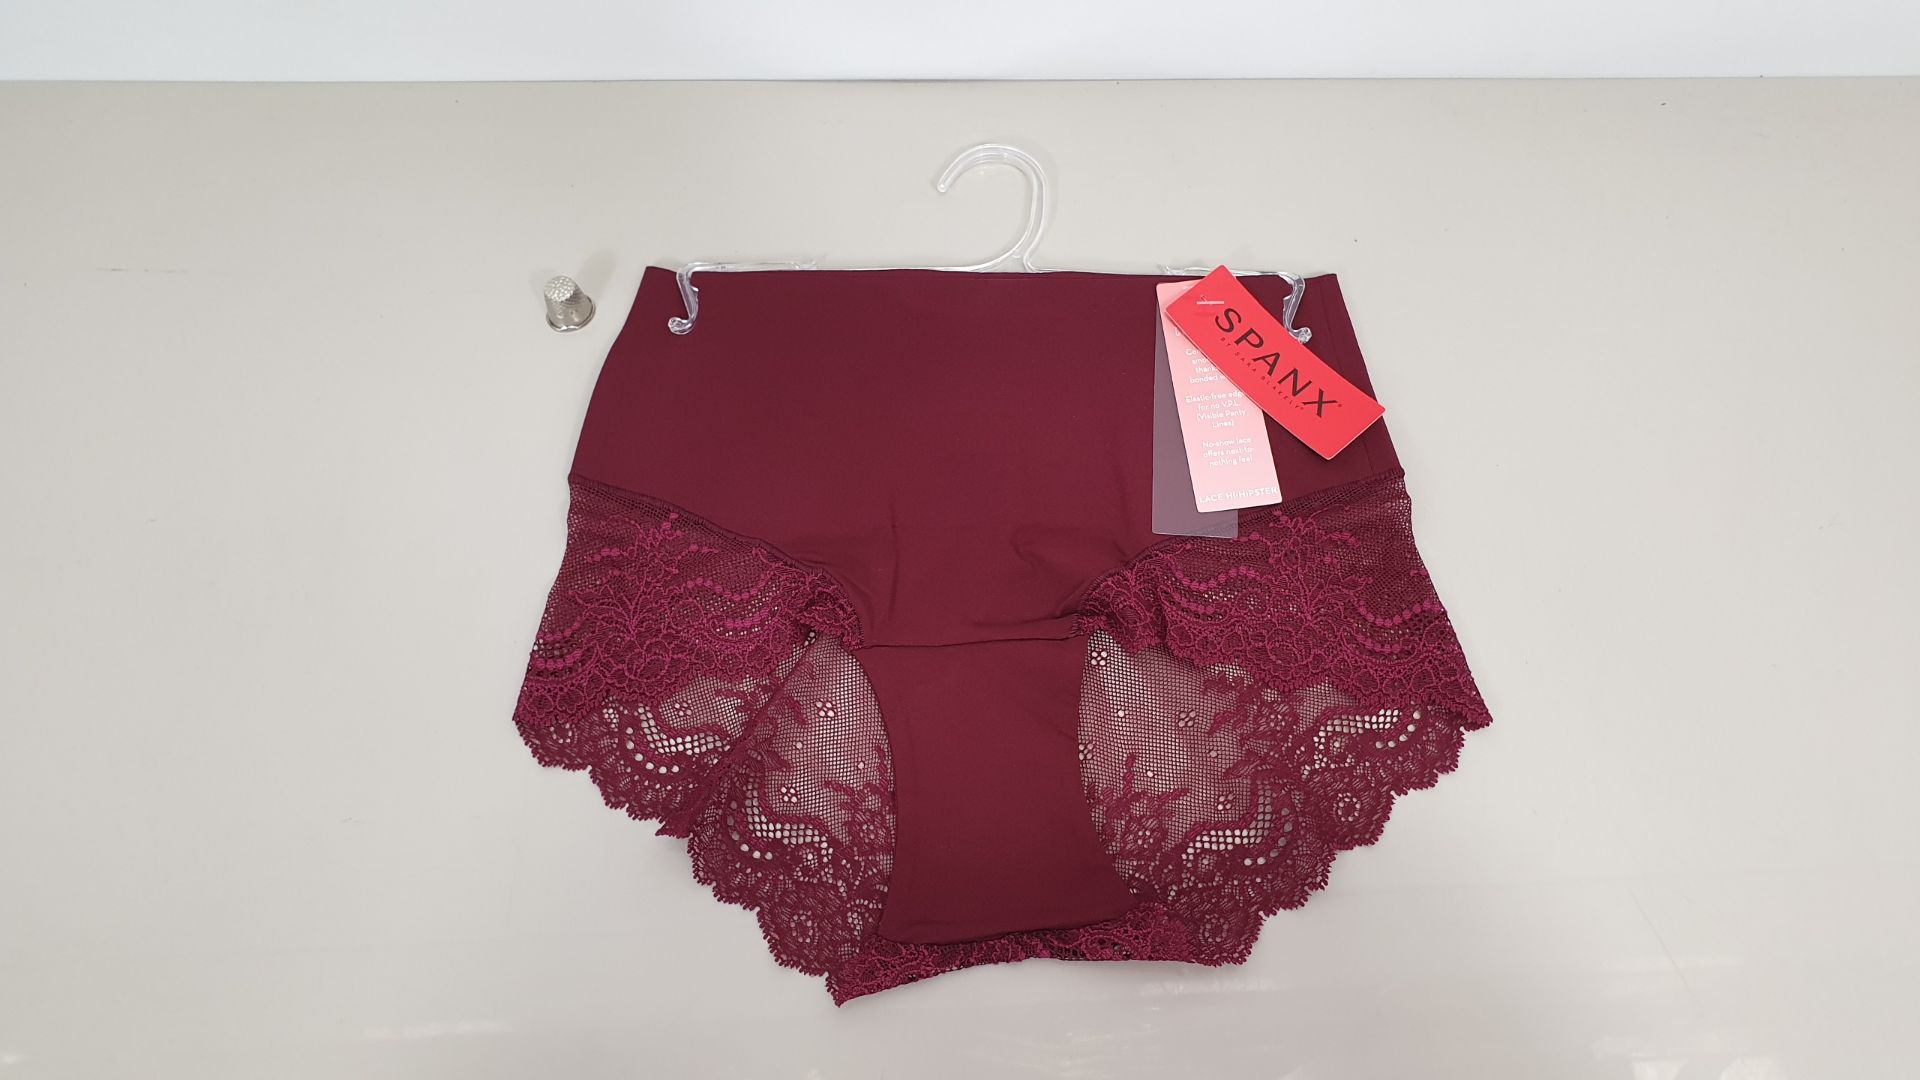 8 X BRAND NEW SPANX LACE HI-HIPSTER WOMENS PANTIES IN RICH GARNET IN SIZES UK MEDIUM